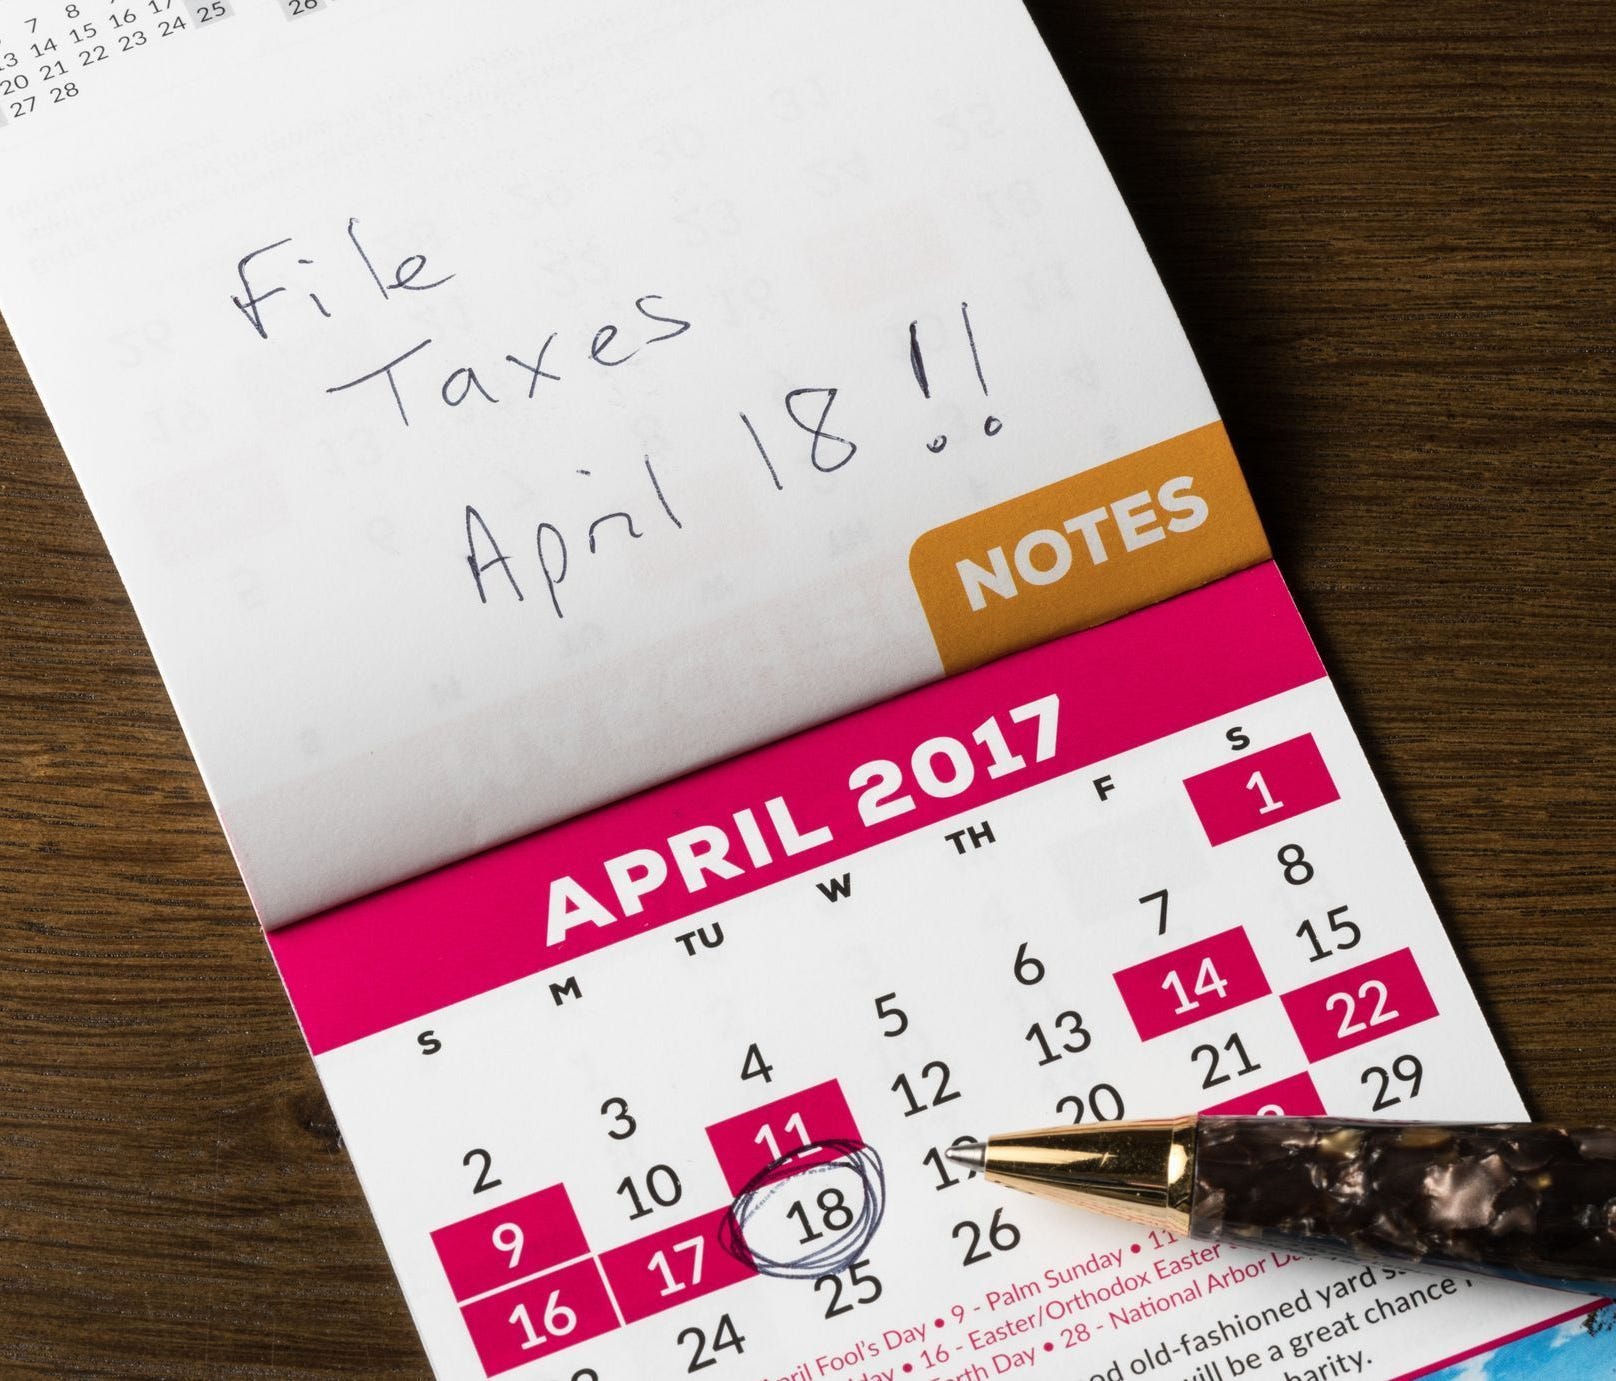 Your taxes are due on April 18 this year.